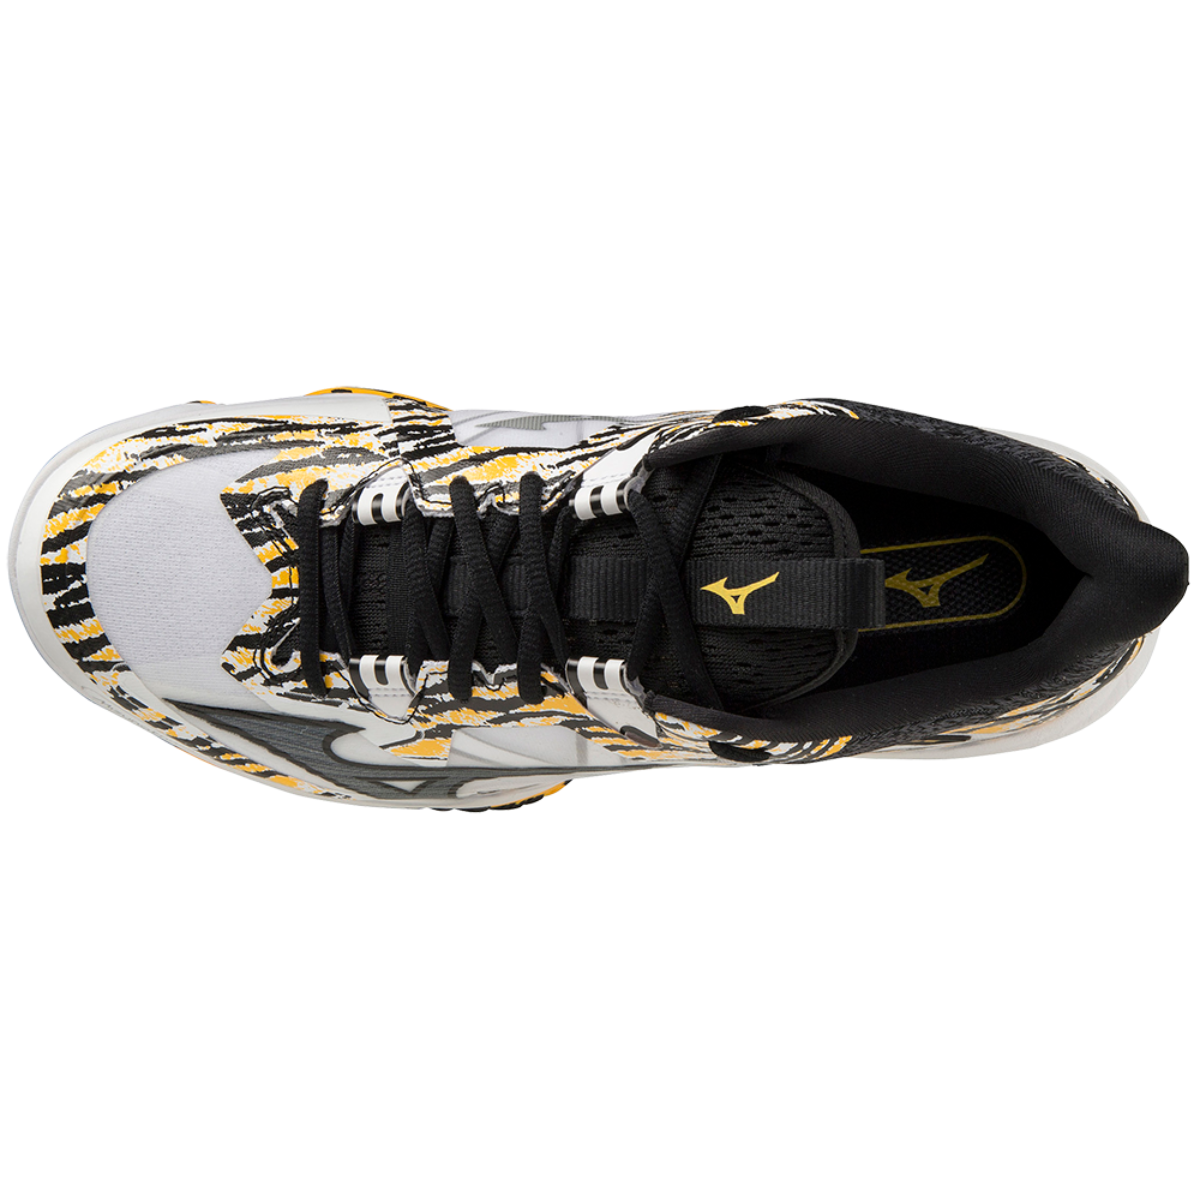 WAVE CLAW NEO 2 UNISEX White / Black / Racing Yellow